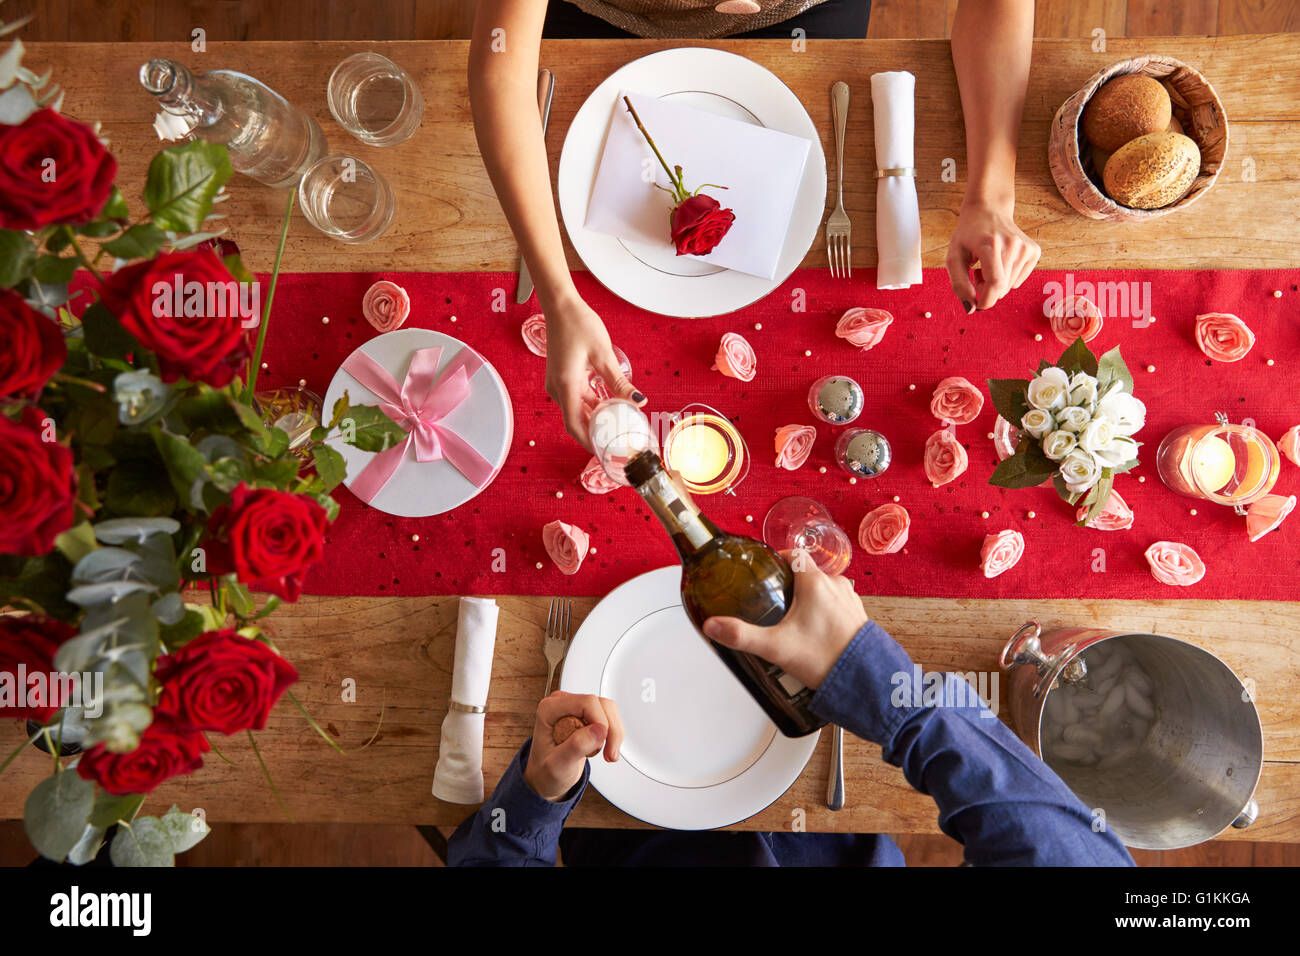 Overhead View Of Romantic Couple At Valentines Day Meal Stock Photo